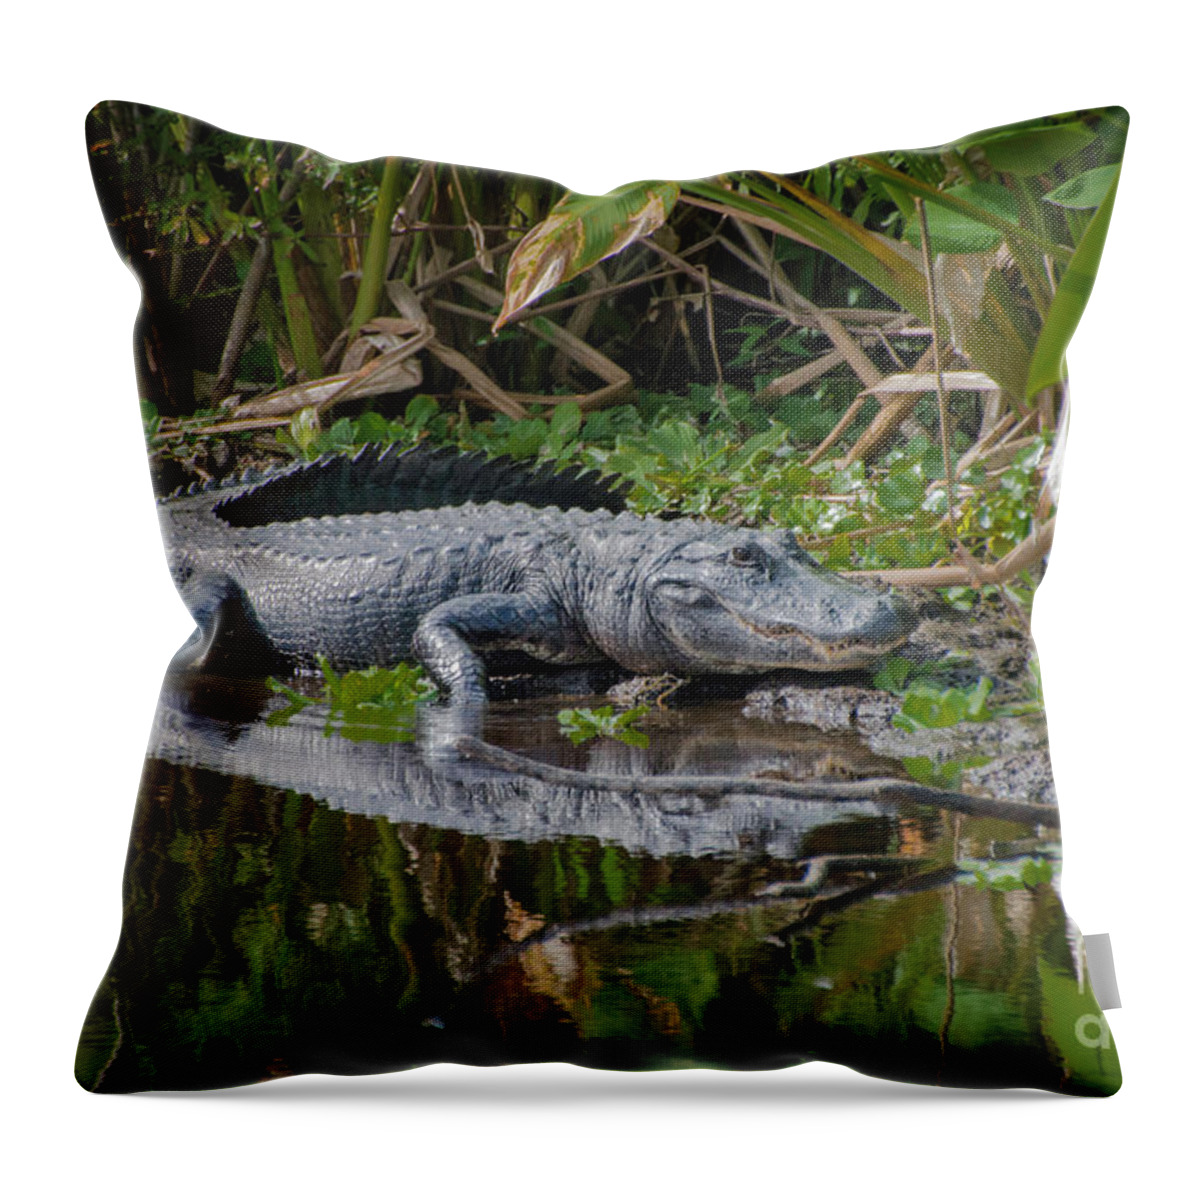 Alligator Throw Pillow featuring the photograph Resting Gator by Judy Hall-Folde